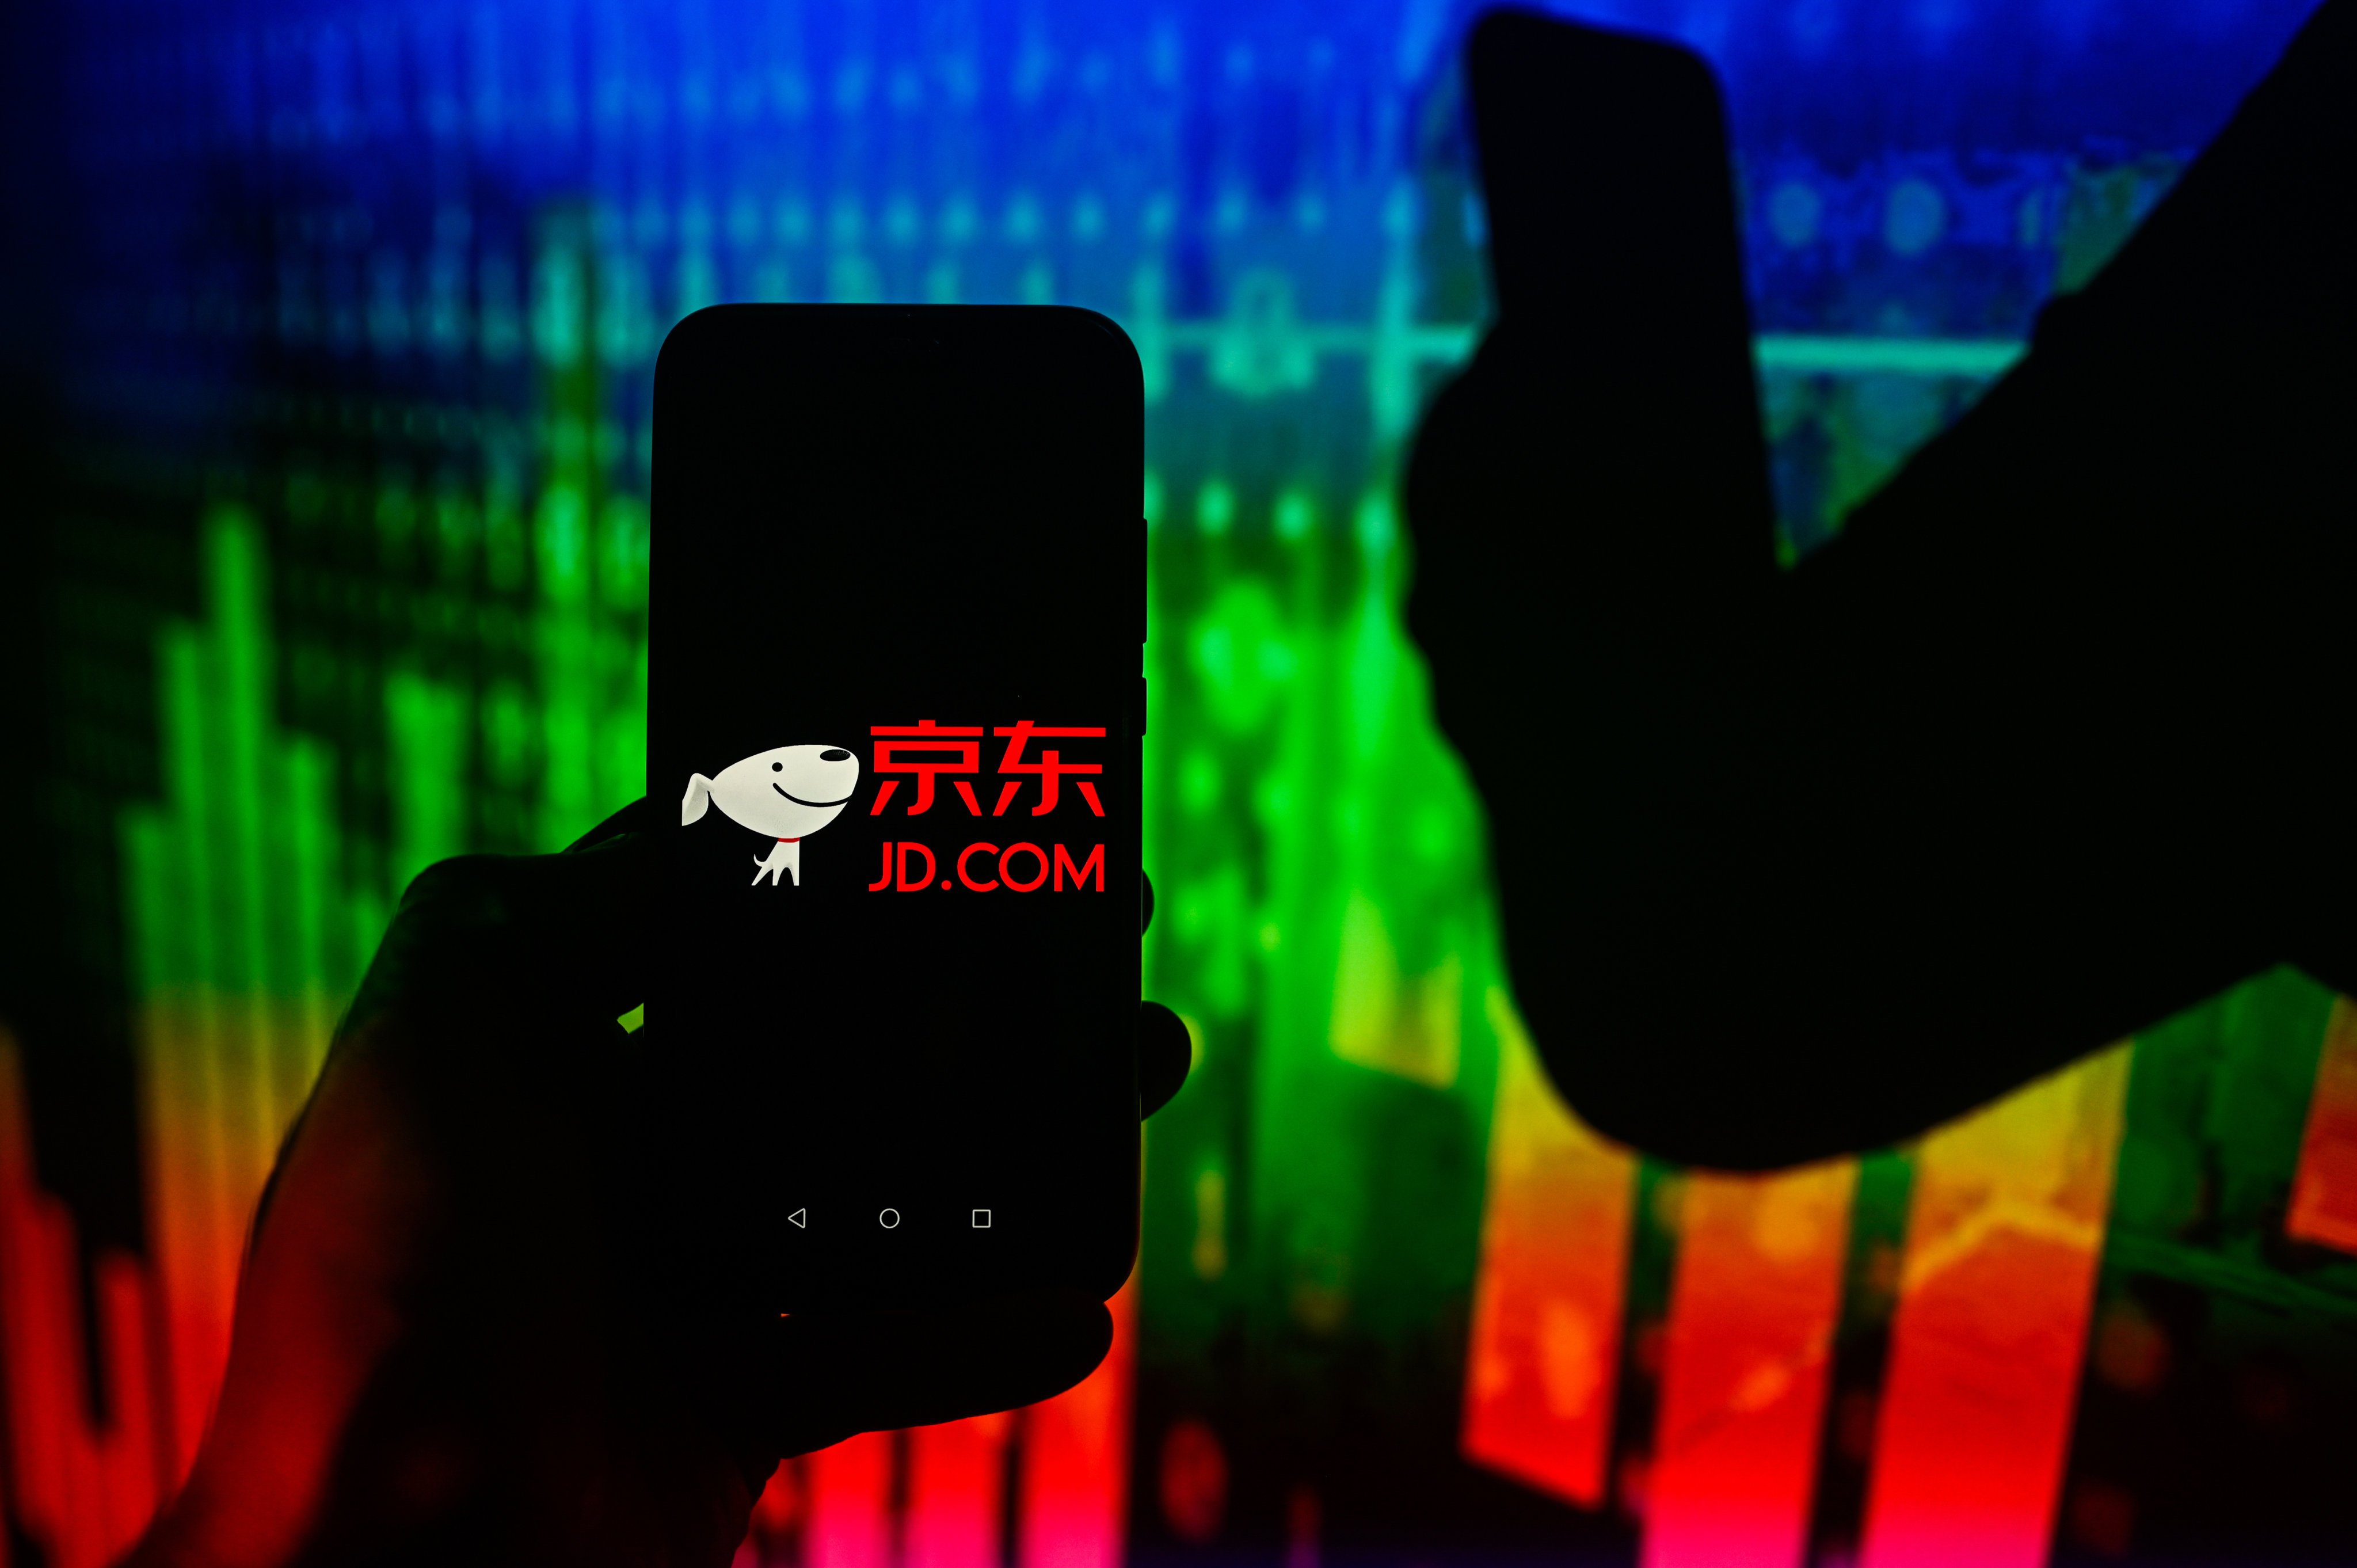 JD.com’s latest quarterly financial results reflect the expansion of China’s online retail market in the first three months of the year. Photo: SOPA Images/LightRocket via Getty Images